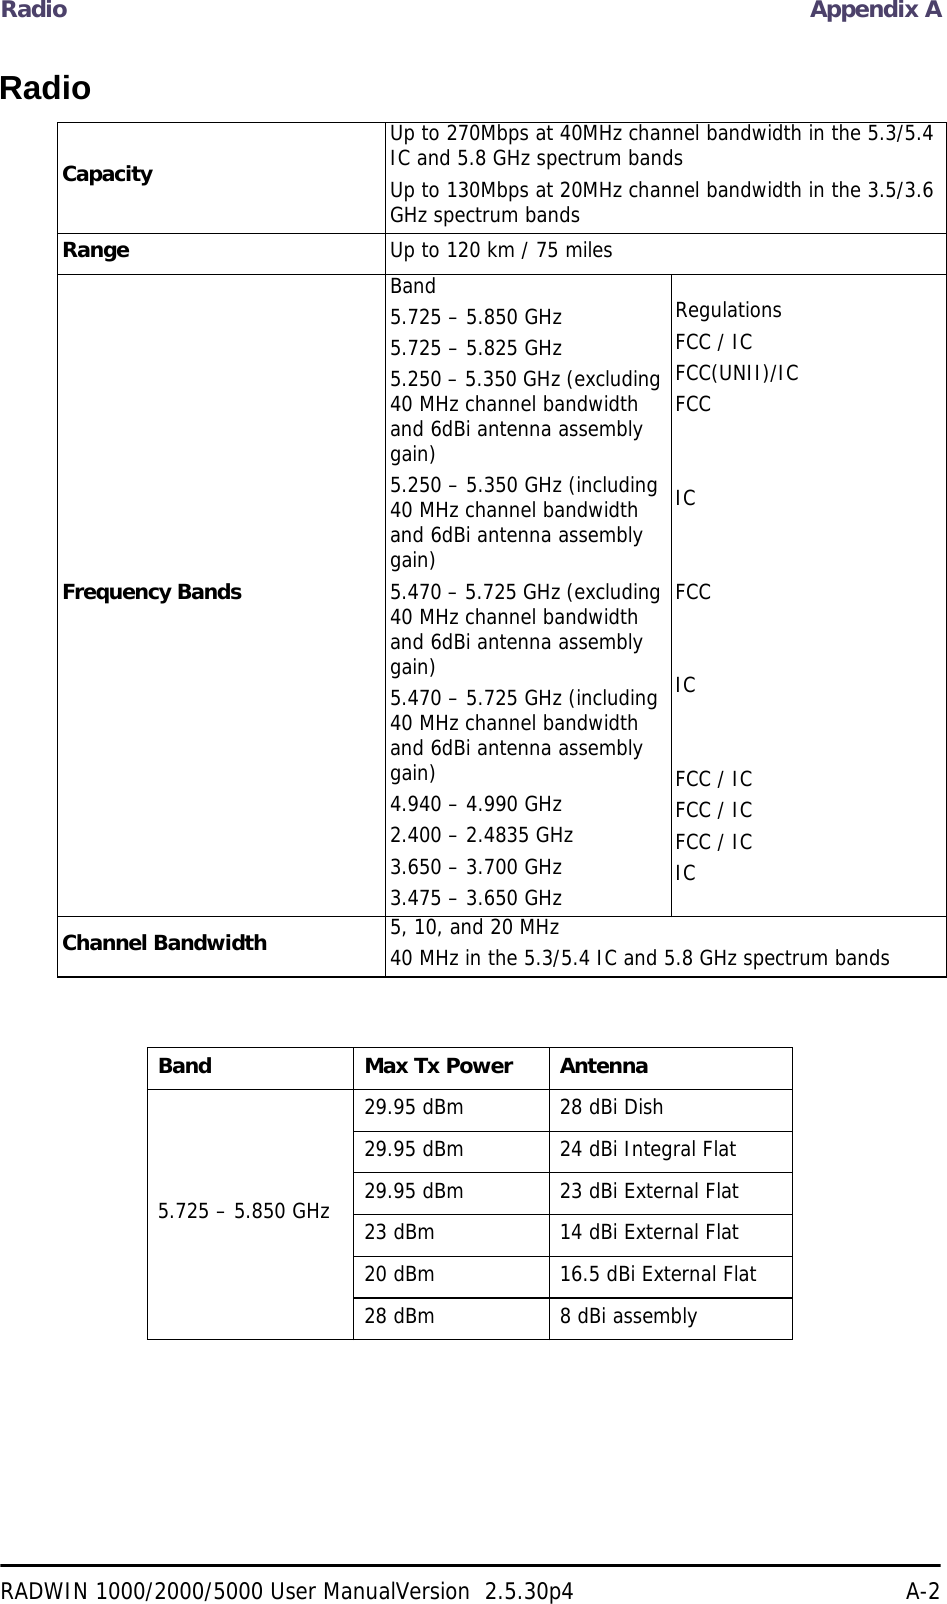 Radio Appendix ARADWIN 1000/2000/5000 User ManualVersion  2.5.30p4 A-2RadioCapacityUp to 270Mbps at 40MHz channel bandwidth in the 5.3/5.4 IC and 5.8 GHz spectrum bandsUp to 130Mbps at 20MHz channel bandwidth in the 3.5/3.6 GHz spectrum bandsRange Up to 120 km / 75 milesFrequency BandsBand5.725 – 5.850 GHz5.725 – 5.825 GHz 5.250 – 5.350 GHz (excluding 40 MHz channel bandwidth and 6dBi antenna assembly gain)5.250 – 5.350 GHz (including 40 MHz channel bandwidth and 6dBi antenna assembly gain)5.470 – 5.725 GHz (excluding 40 MHz channel bandwidth and 6dBi antenna assembly gain)5.470 – 5.725 GHz (including 40 MHz channel bandwidth and 6dBi antenna assembly gain)4.940 – 4.990 GHz 2.400 – 2.4835 GHz3.650 – 3.700 GHz3.475 – 3.650 GHzRegulationsFCC / ICFCC(UNII)/ICFCCICFCCICFCC / ICFCC / ICFCC / ICICChannel Bandwidth 5, 10, and 20 MHz40 MHz in the 5.3/5.4 IC and 5.8 GHz spectrum bandsBand Max Tx Power Antenna5.725 – 5.850 GHz29.95 dBm  28 dBi Dish29.95 dBm 24 dBi Integral Flat29.95 dBm 23 dBi External Flat23 dBm 14 dBi External Flat20 dBm 16.5 dBi External Flat28 dBm 8 dBi assembly